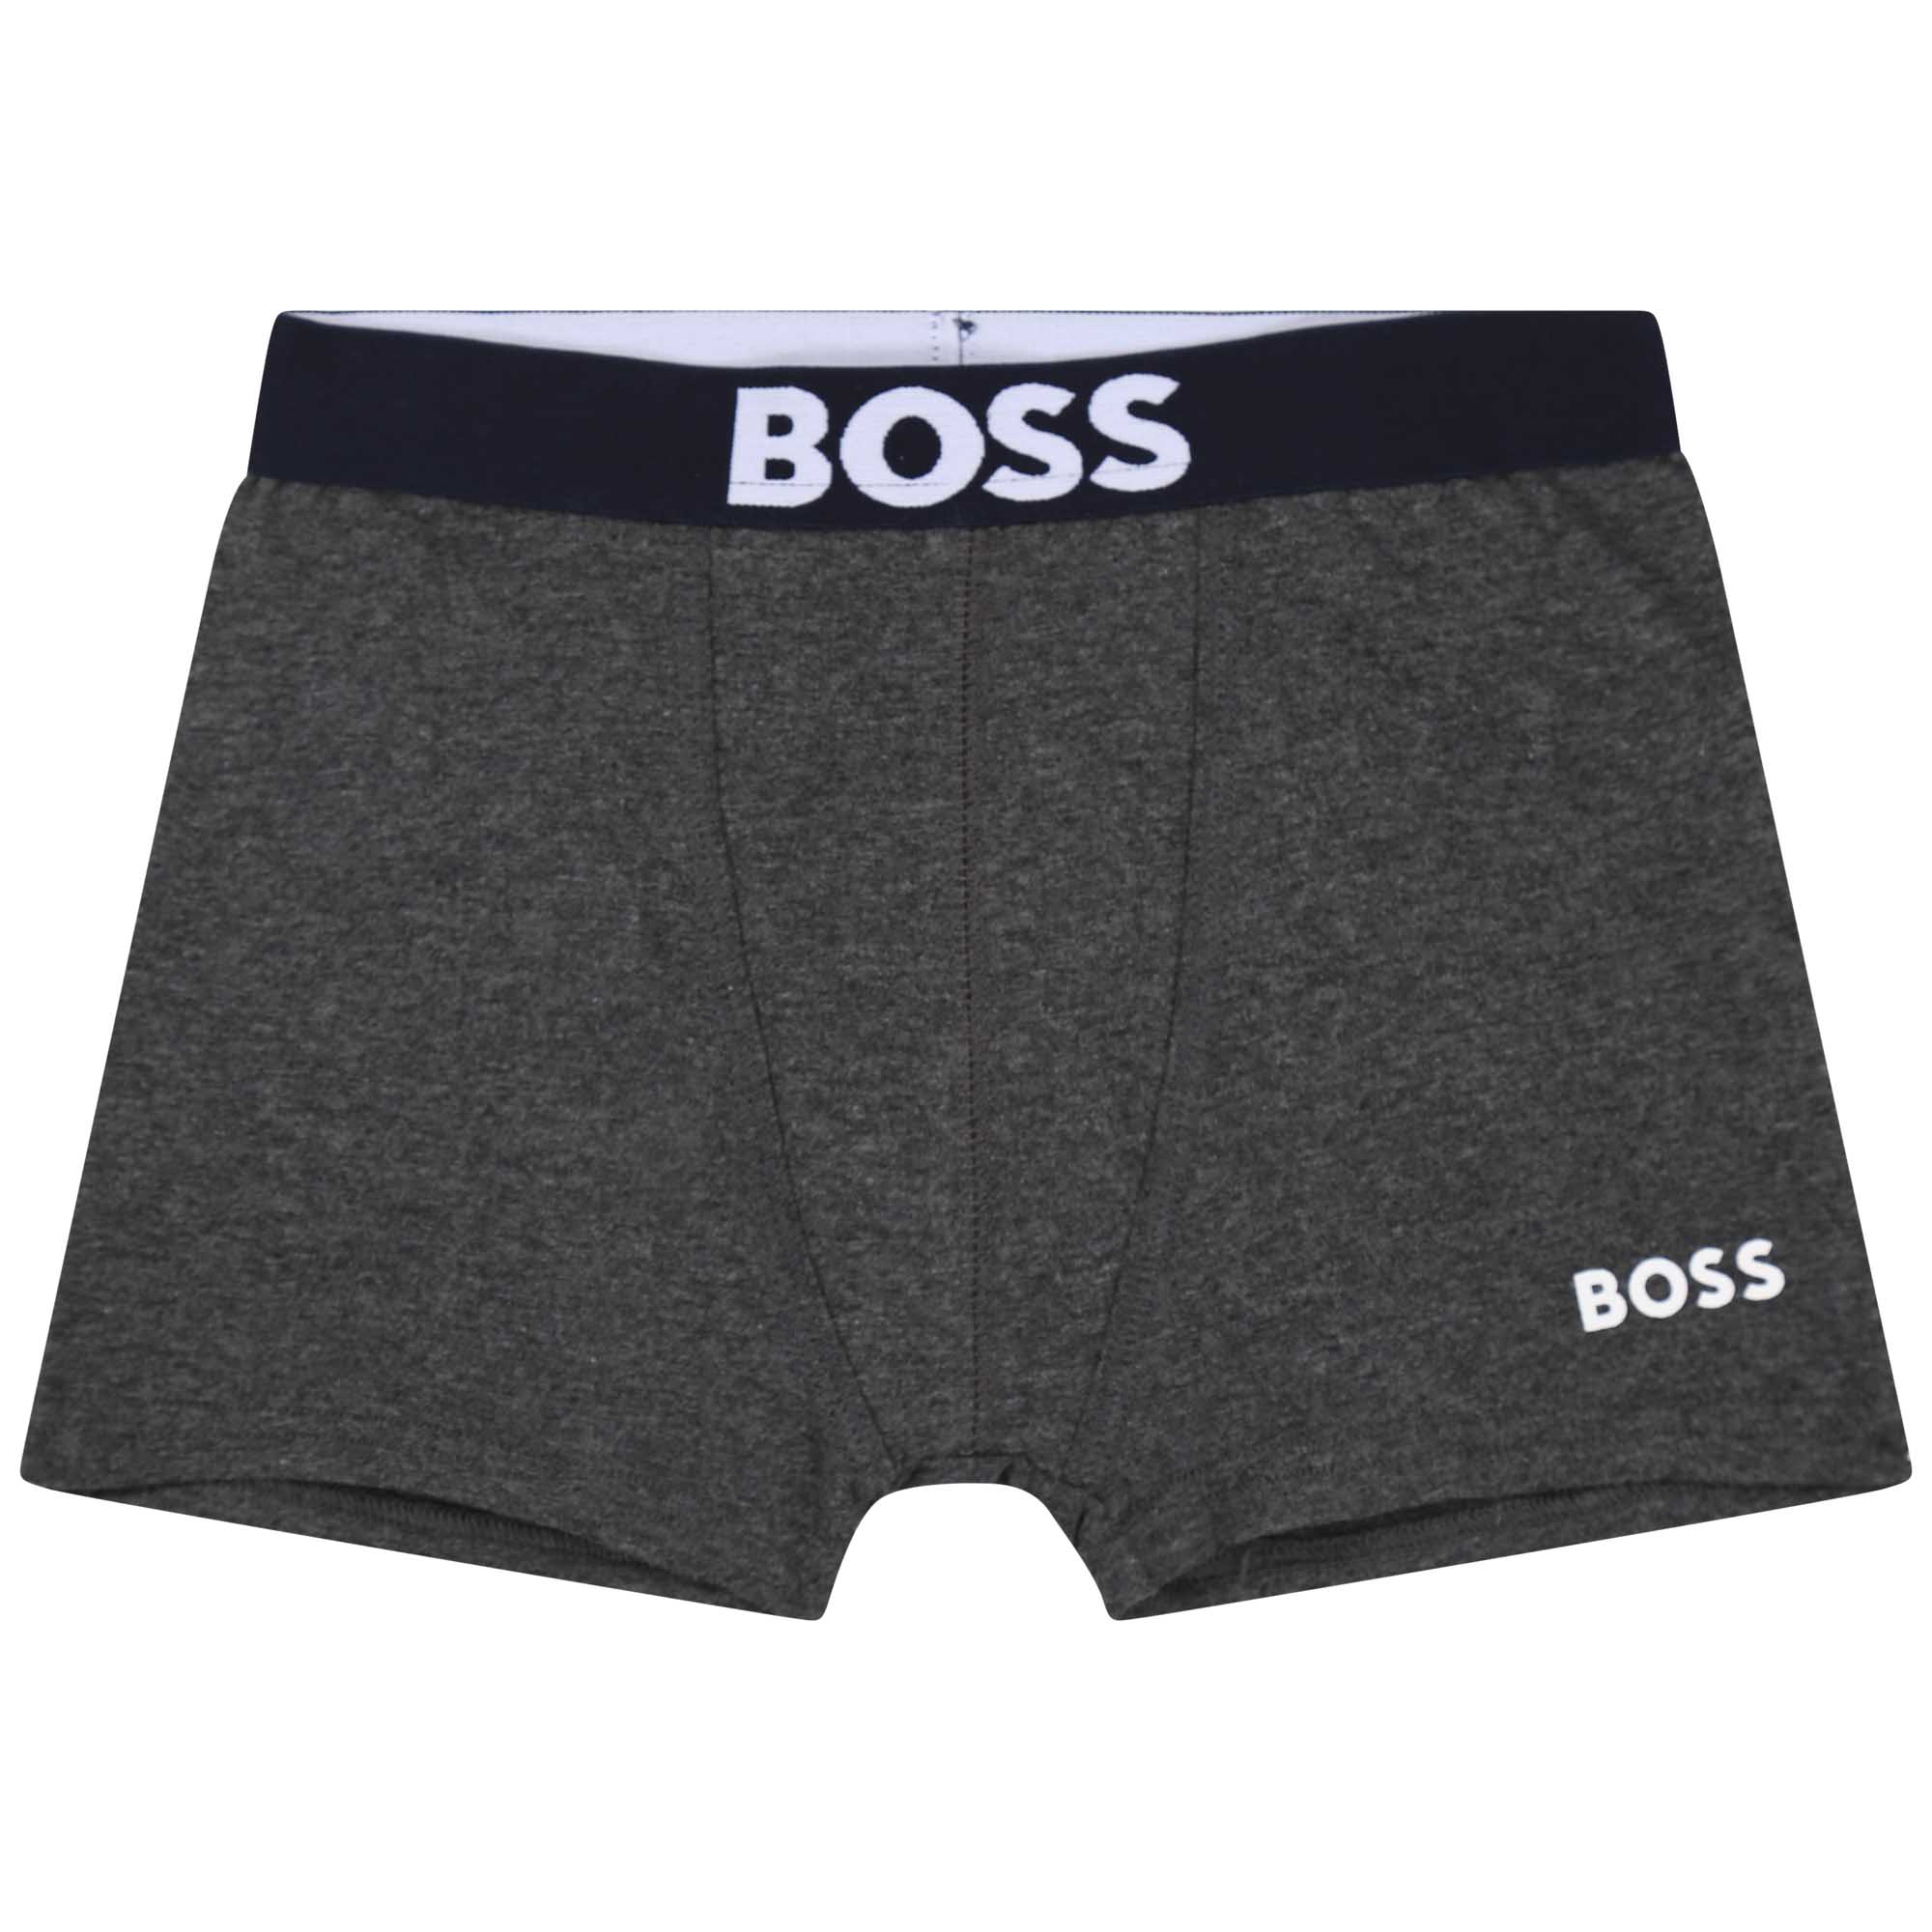 Set of 2 pairs of boxers BOSS for BOY